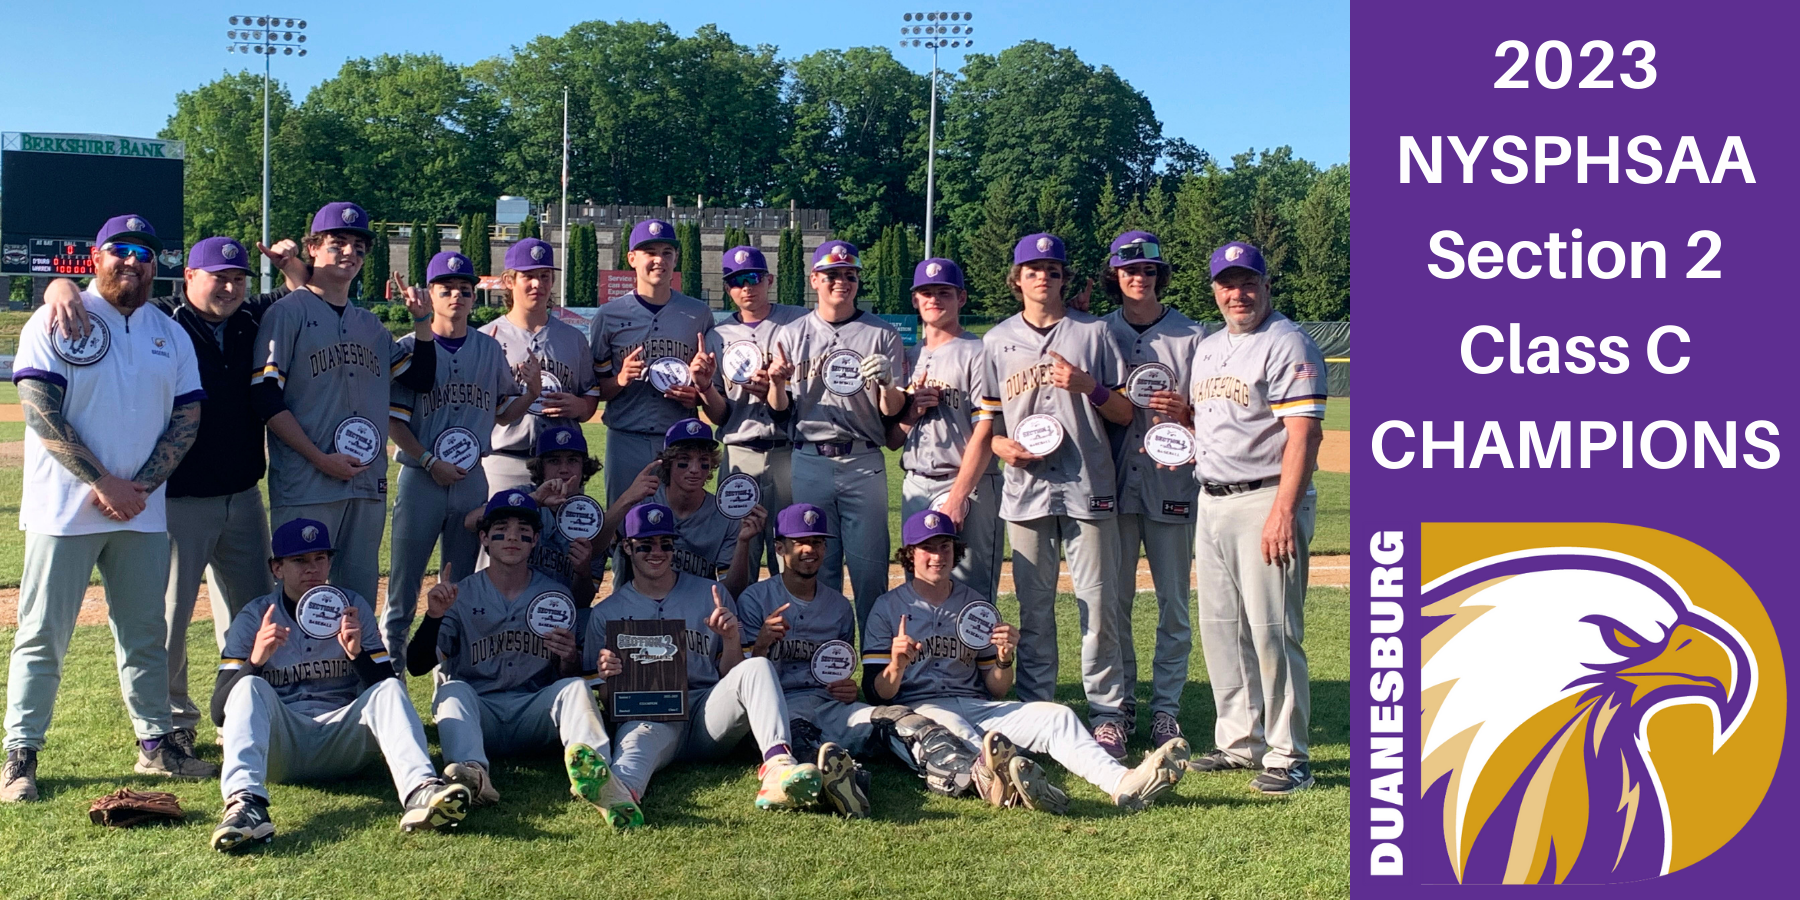 a baseball team poses with trophies on a baseball field, with a purple graphic background that has an eagle logo and the words "2023 NYSPHSAA Section 2 Class C Champions."